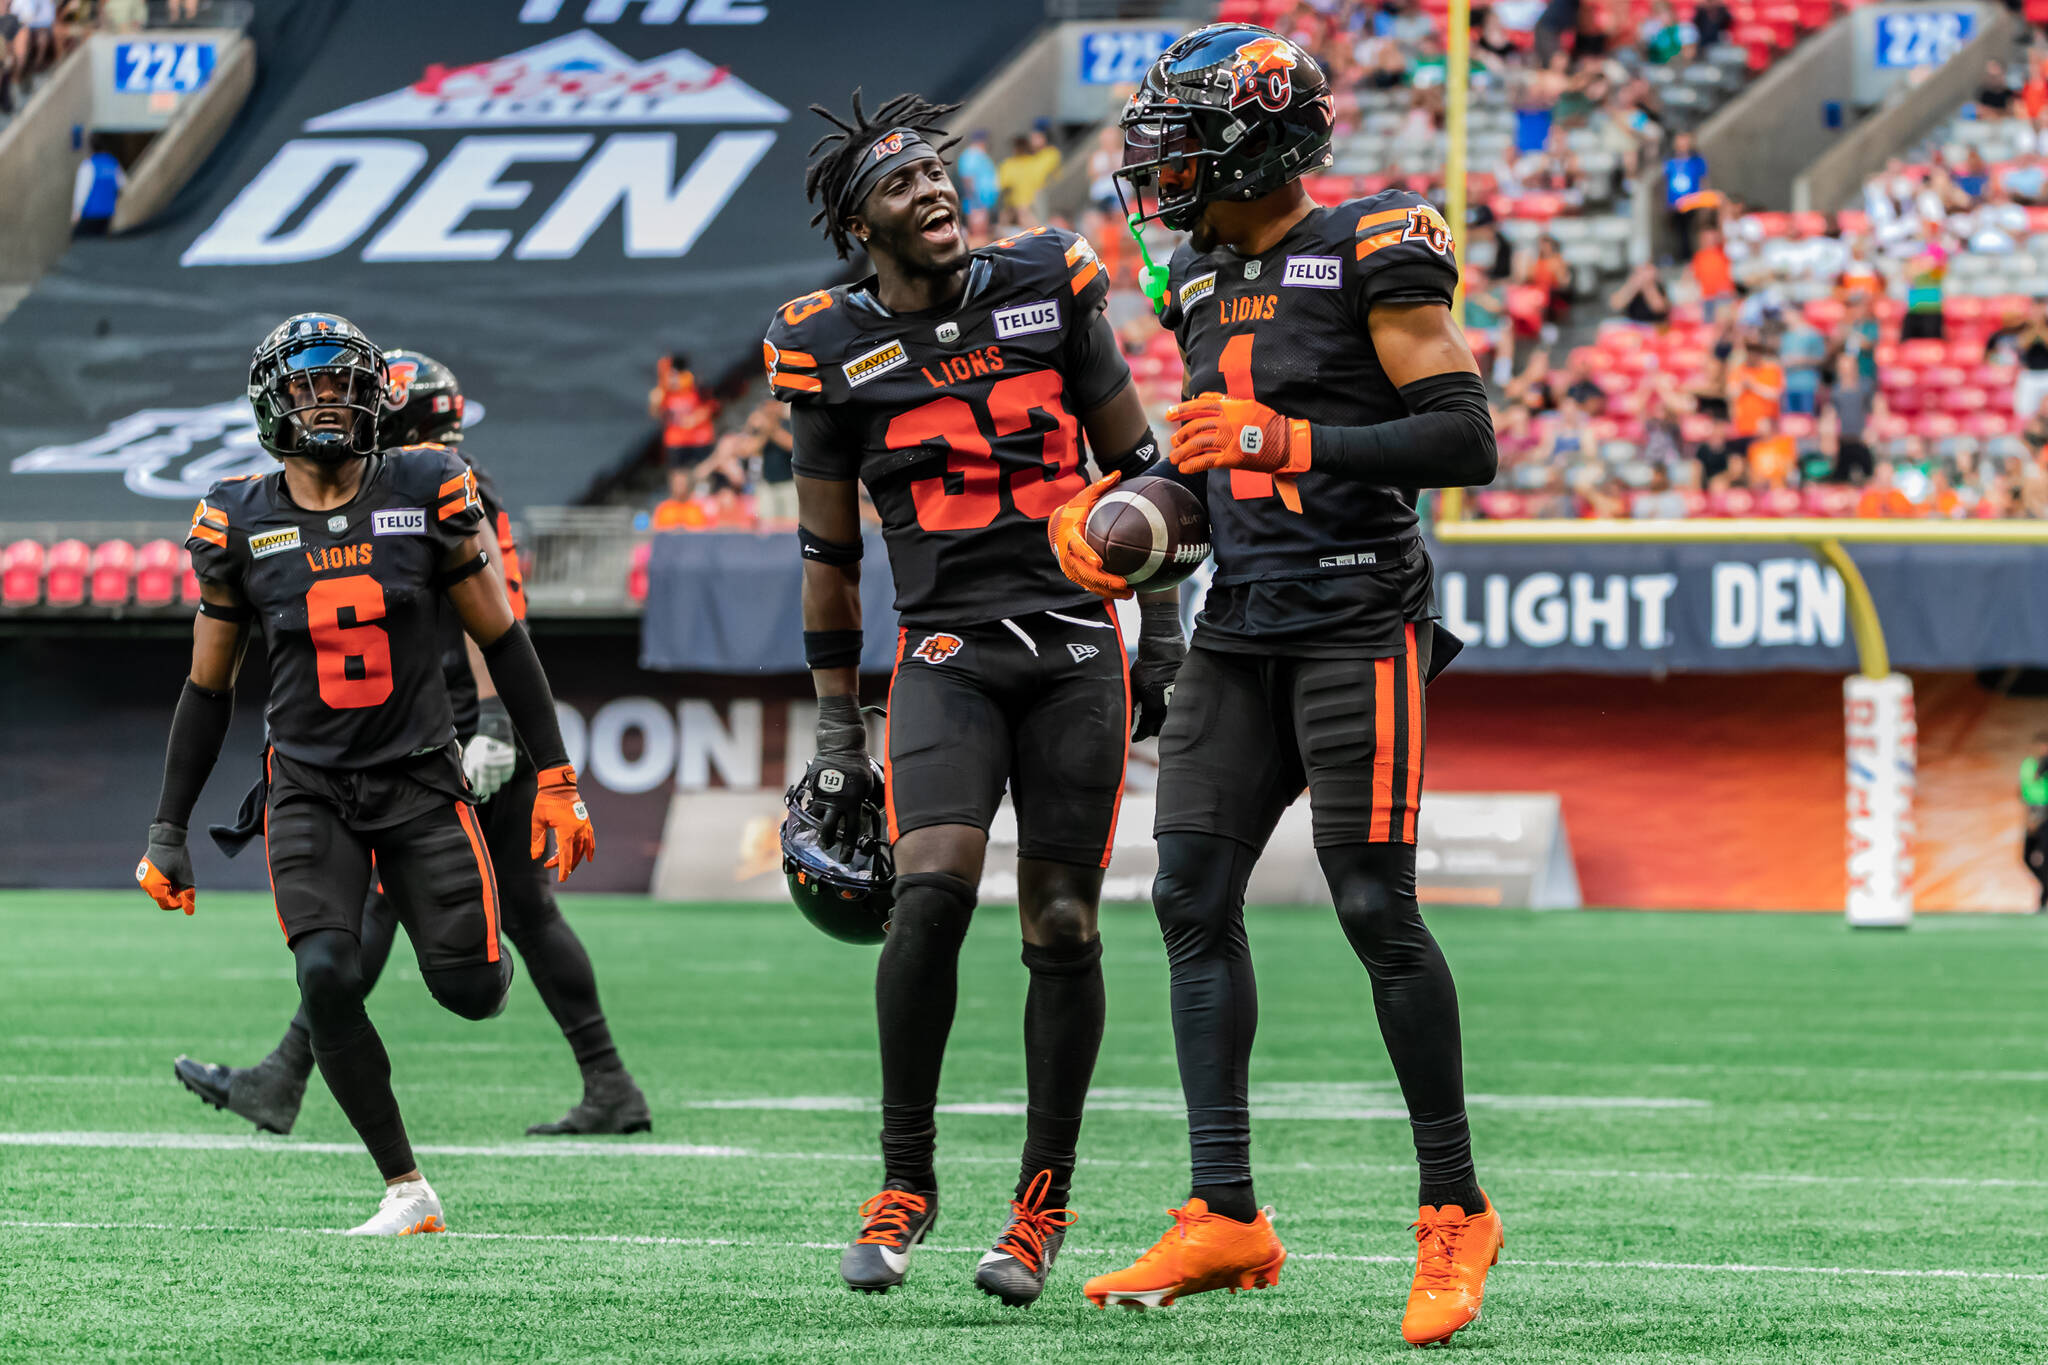 TJ Lee (6) and Manny Rugumba (33) celebrate with Gary Peters (1) after his interception during the Lions 19-9 win over the Saskatchewan Roughriders at BC Place Stadium on Saturday. Steve Chang, B.C. Lions